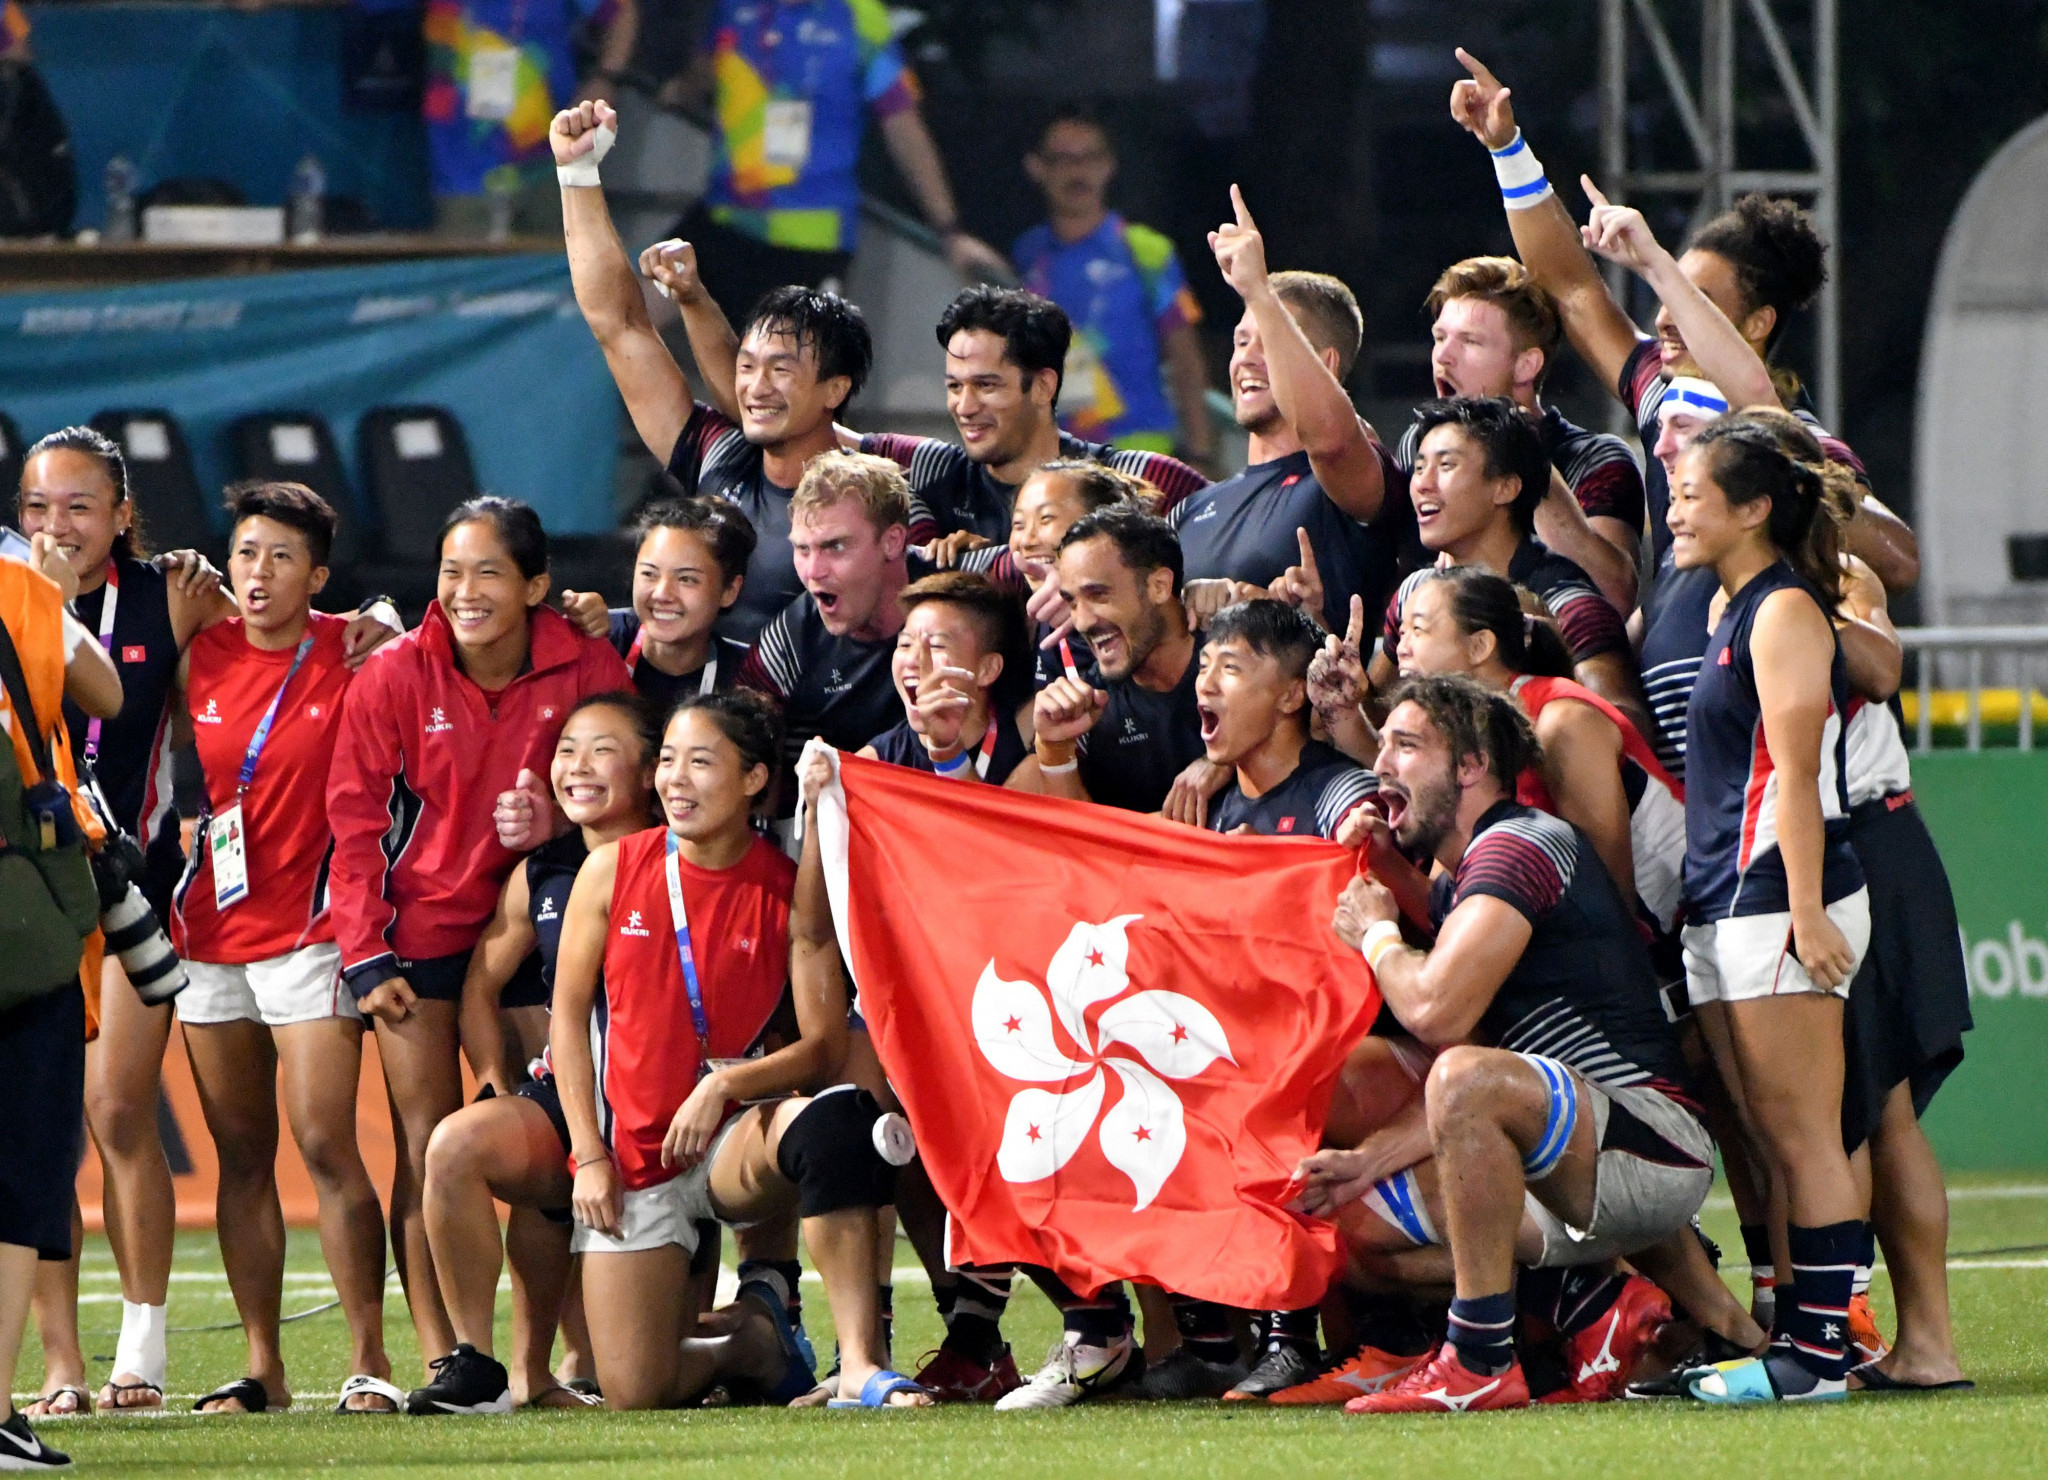 Hong Kong denied Japan a fourth consecutive men's rugby sevens triumph with an impressive 14-0 win in the final ©Getty Images